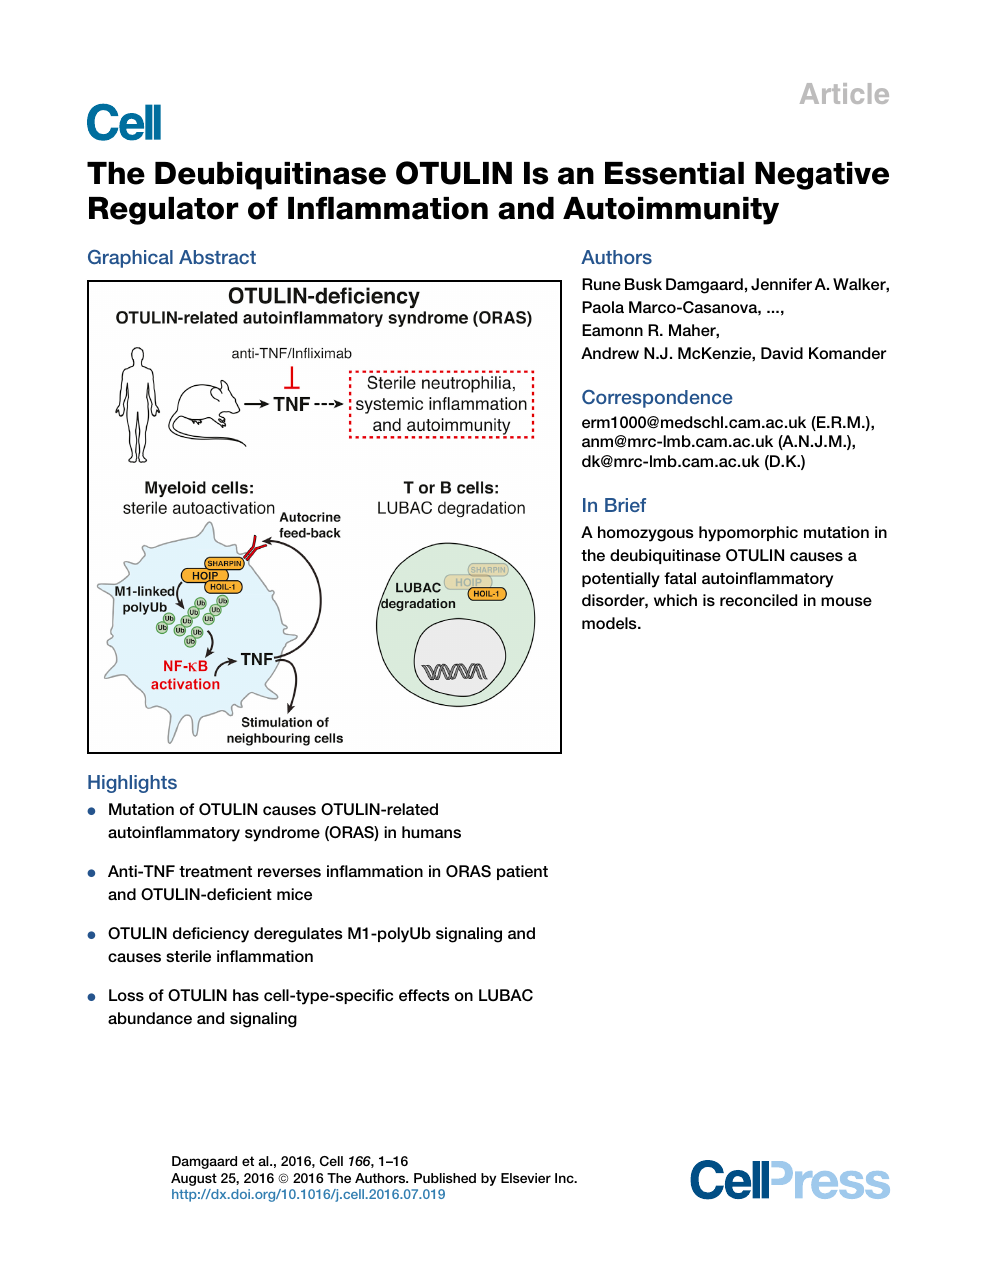 The Deubiquitinase Otulin Is An Essential Negative Regulator Of Inflammation And Autoimmunity Topic Of Research Paper In Biological Sciences Download Scholarly Article Pdf And Read For Free On Cyberleninka Open Science